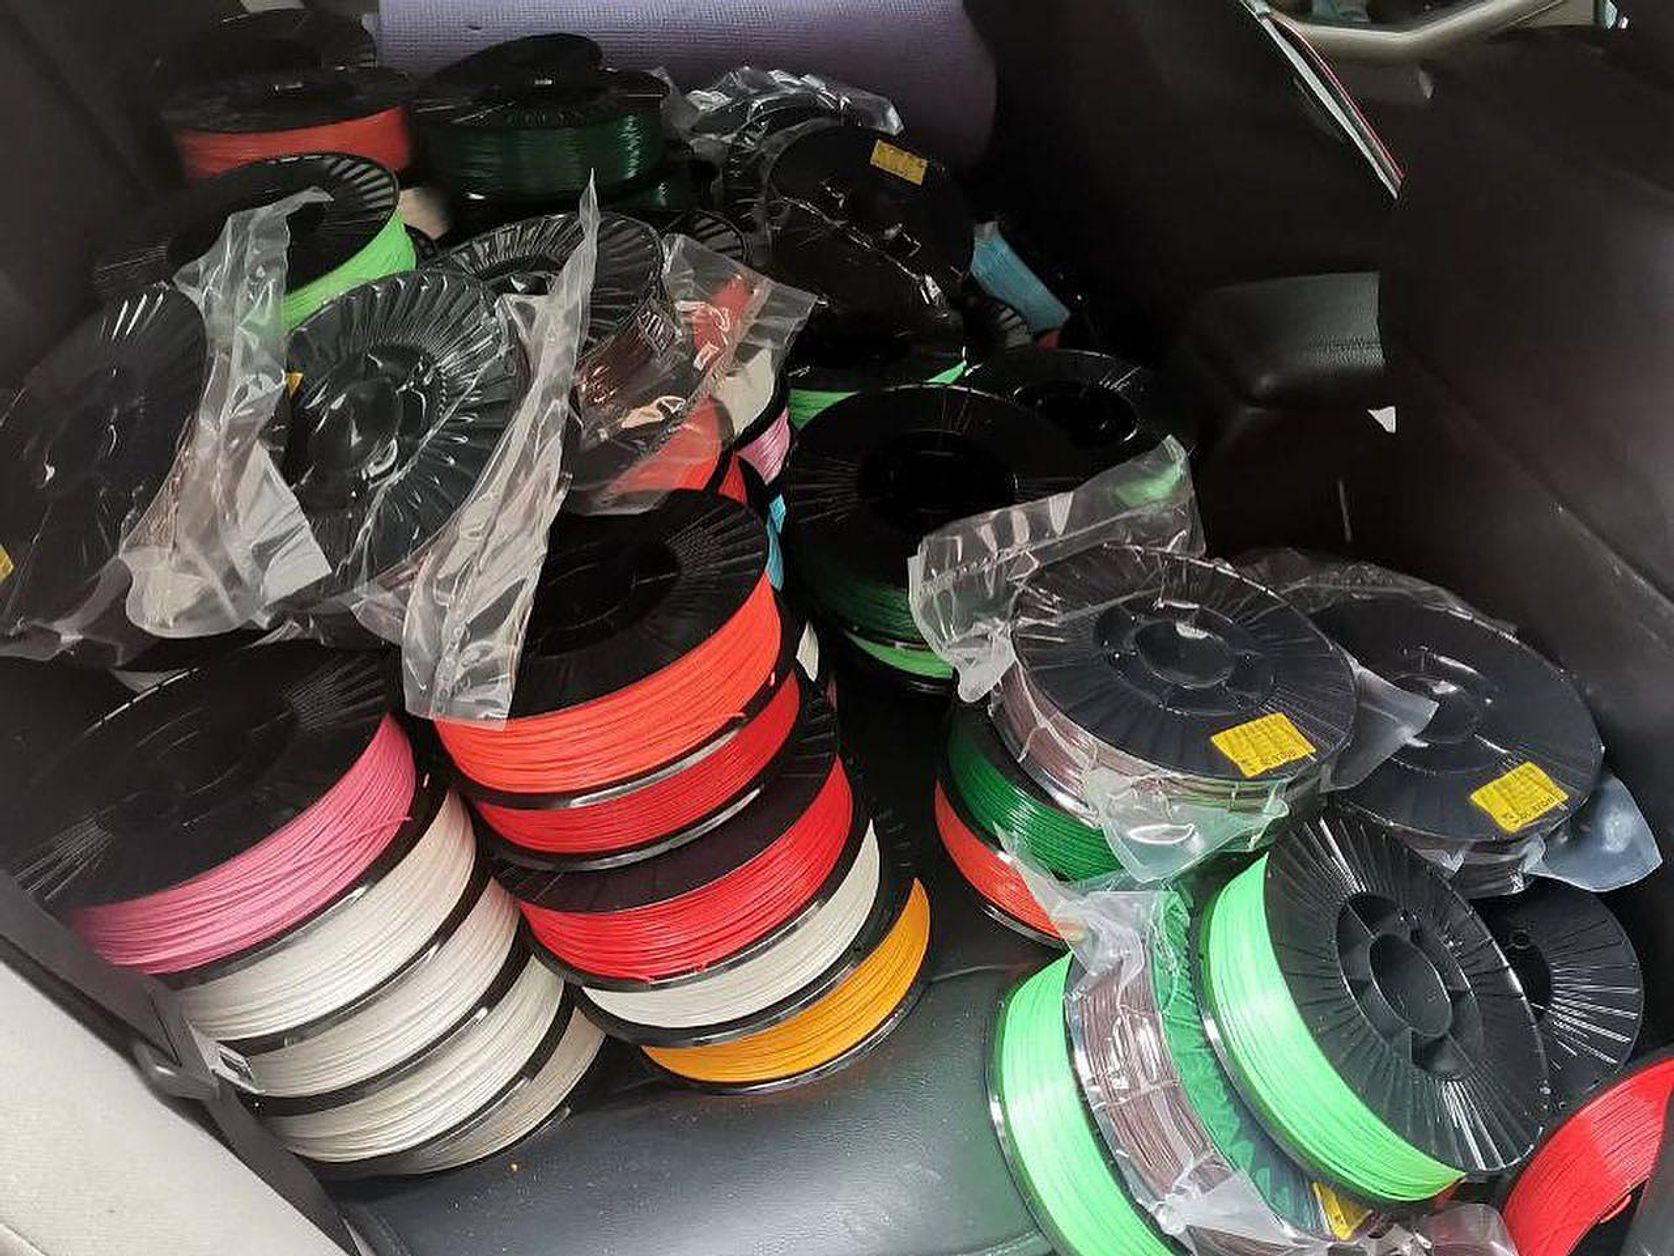 Stacks of colorful spools of 3d printing filament in the back of a car.